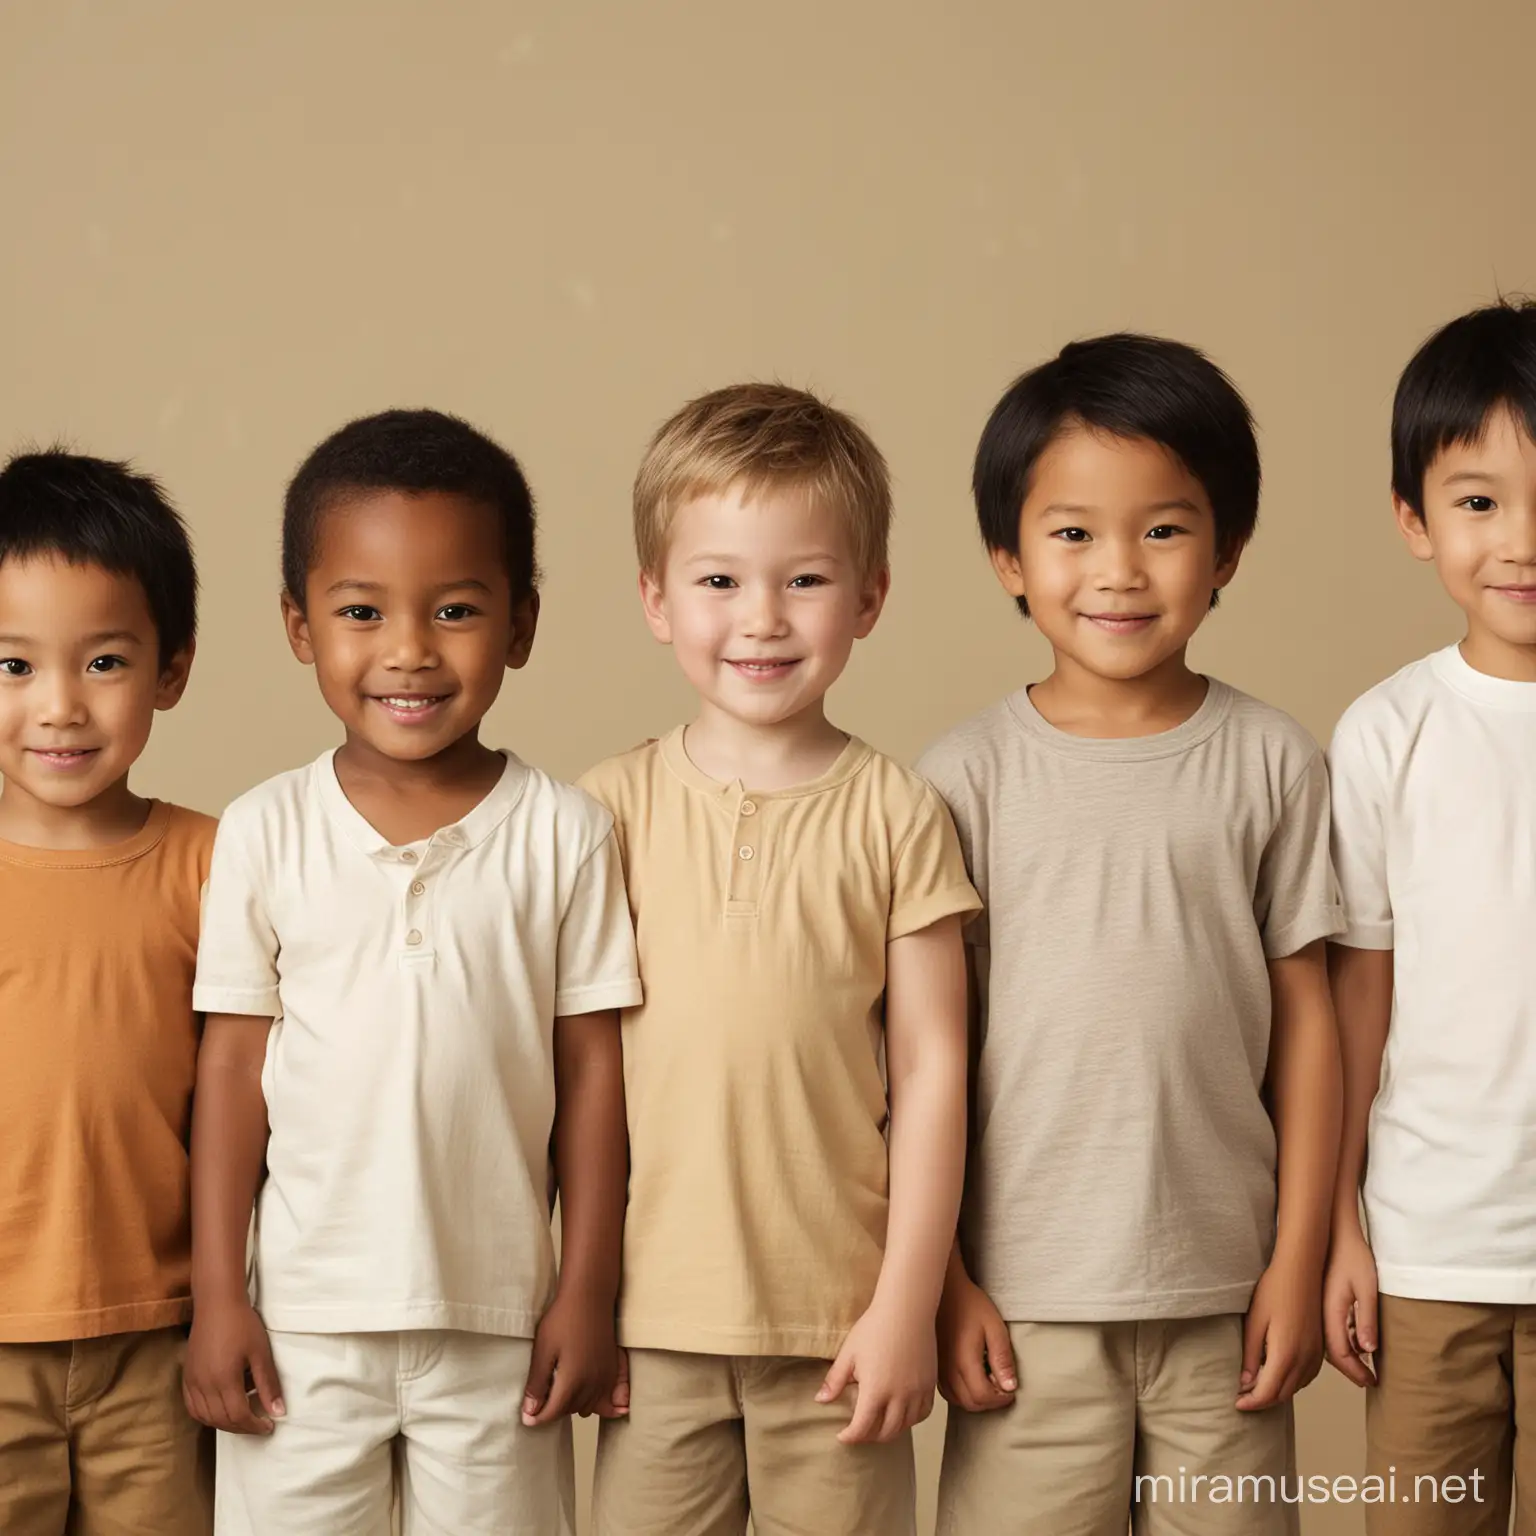 Diverse Group of Children Standing in a Row